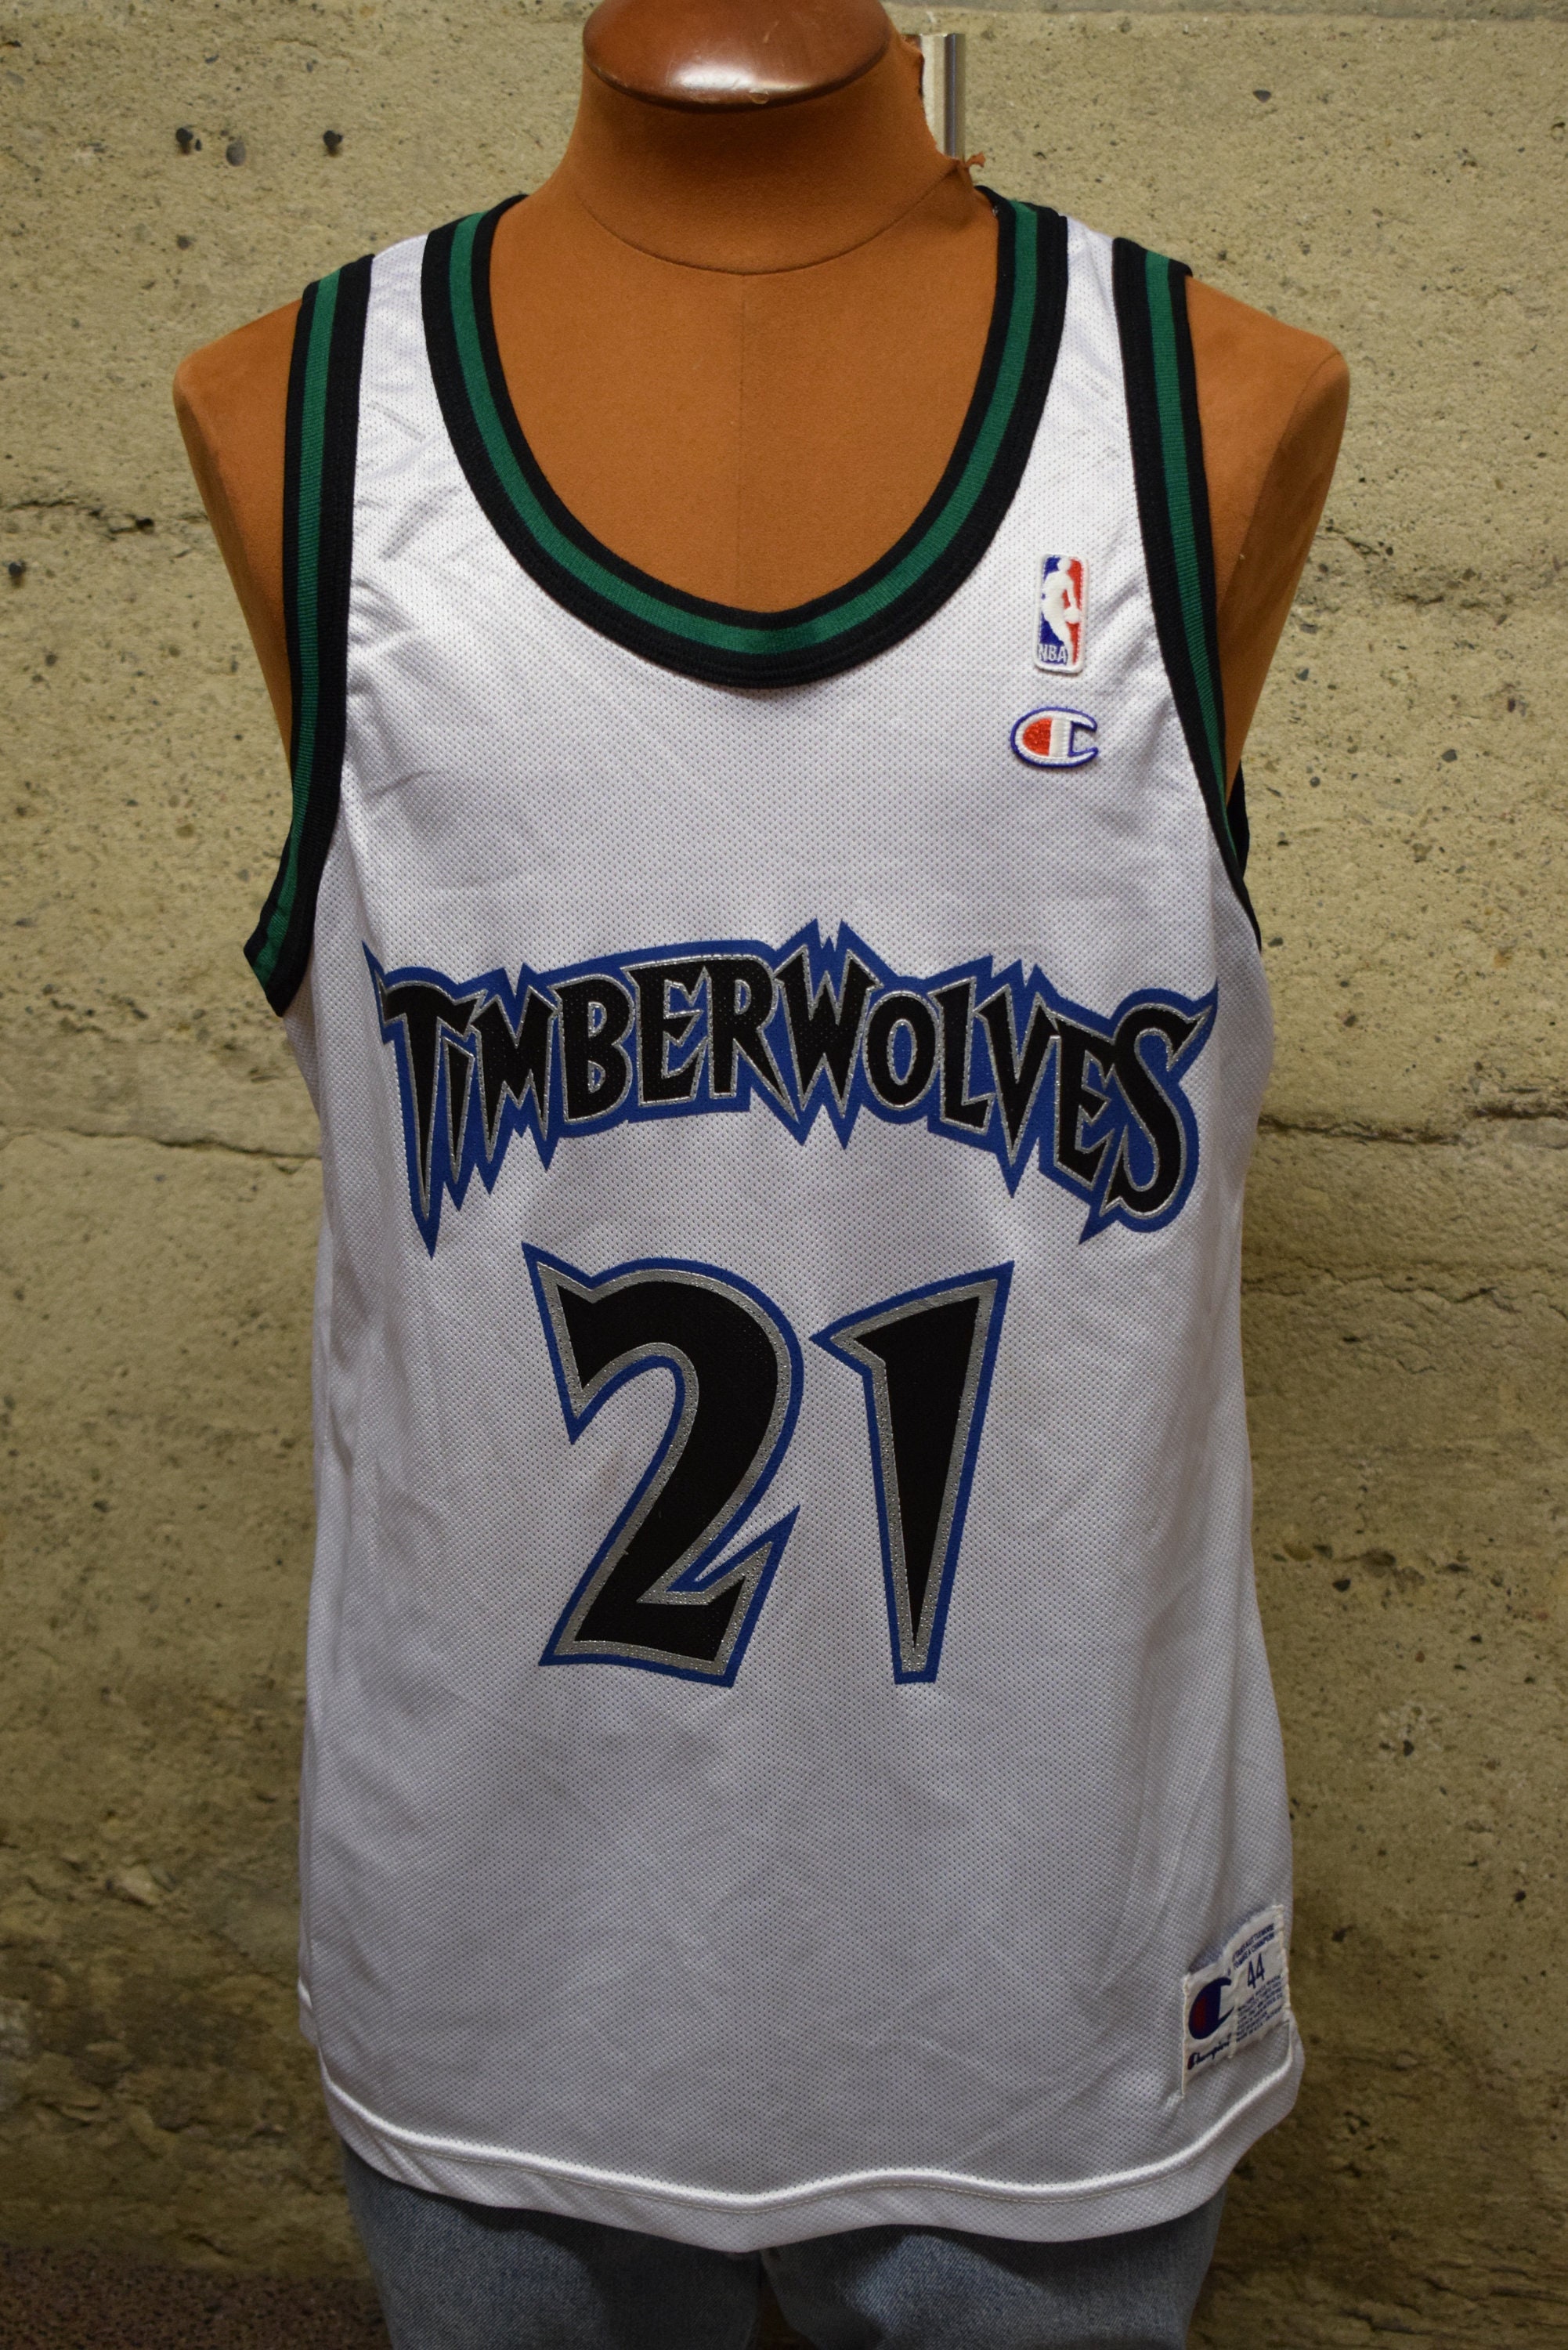 Old Timberwolves Jerseys & Retro Shirts for Sale - Vintage Sports